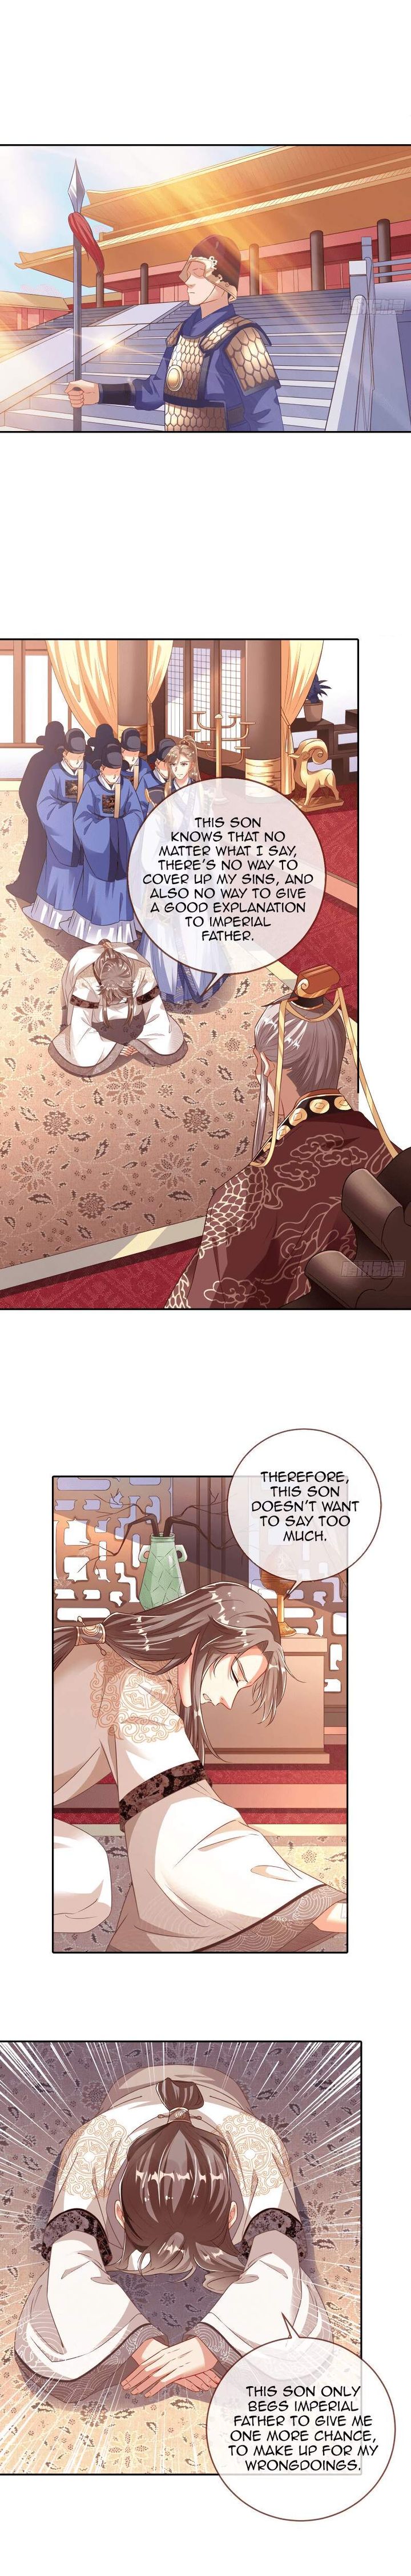 Cheating Men Must Die Chapter 256 Page 1